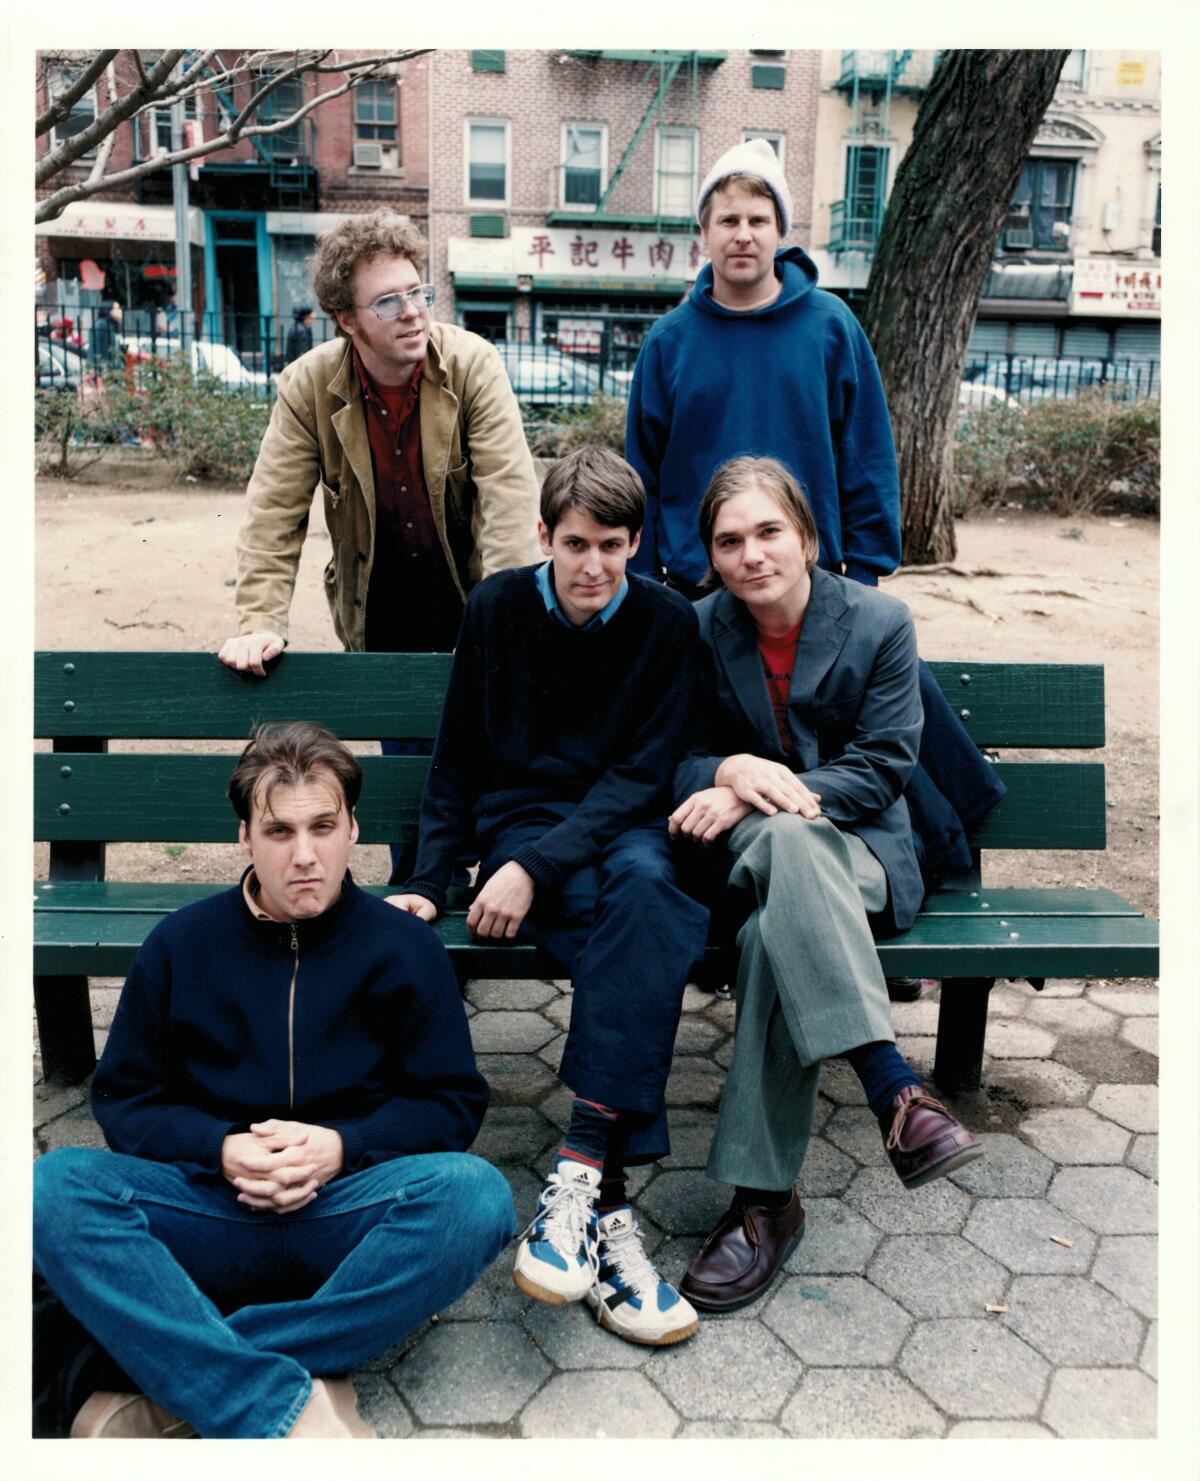 Pavement members pose on a park bench.